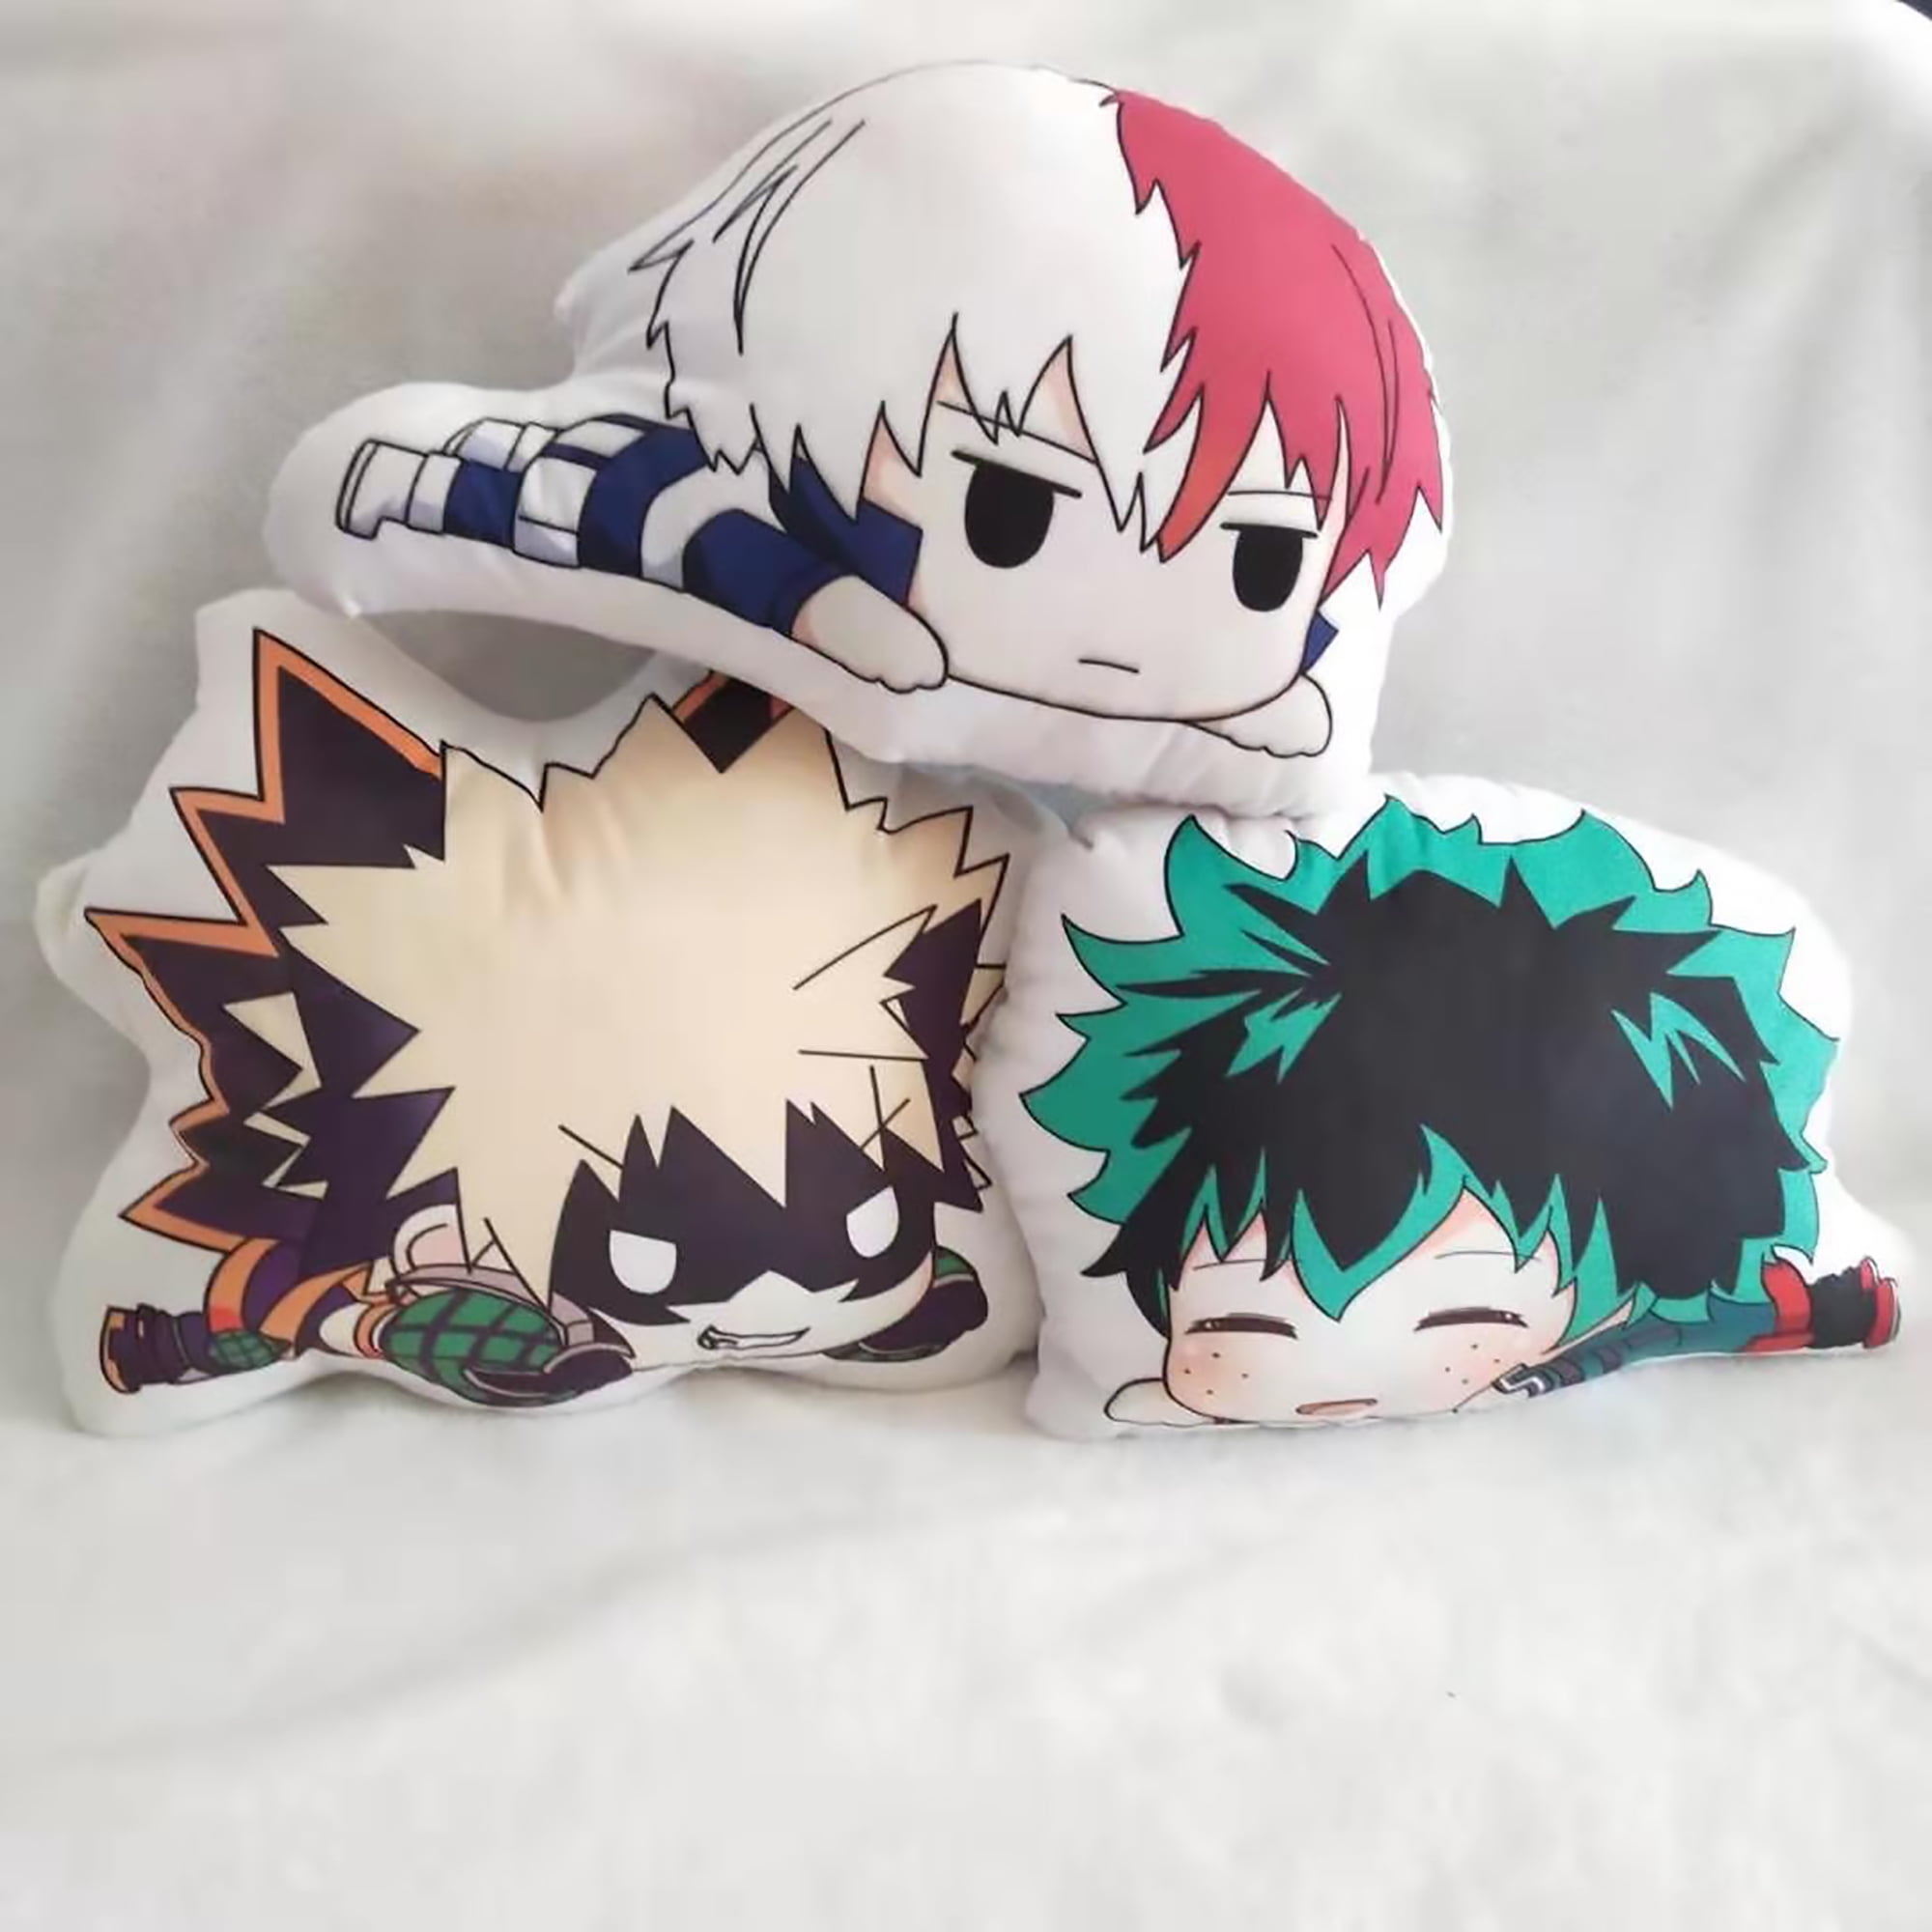 Anime Pillows & Cushions for Sale | Redbubble